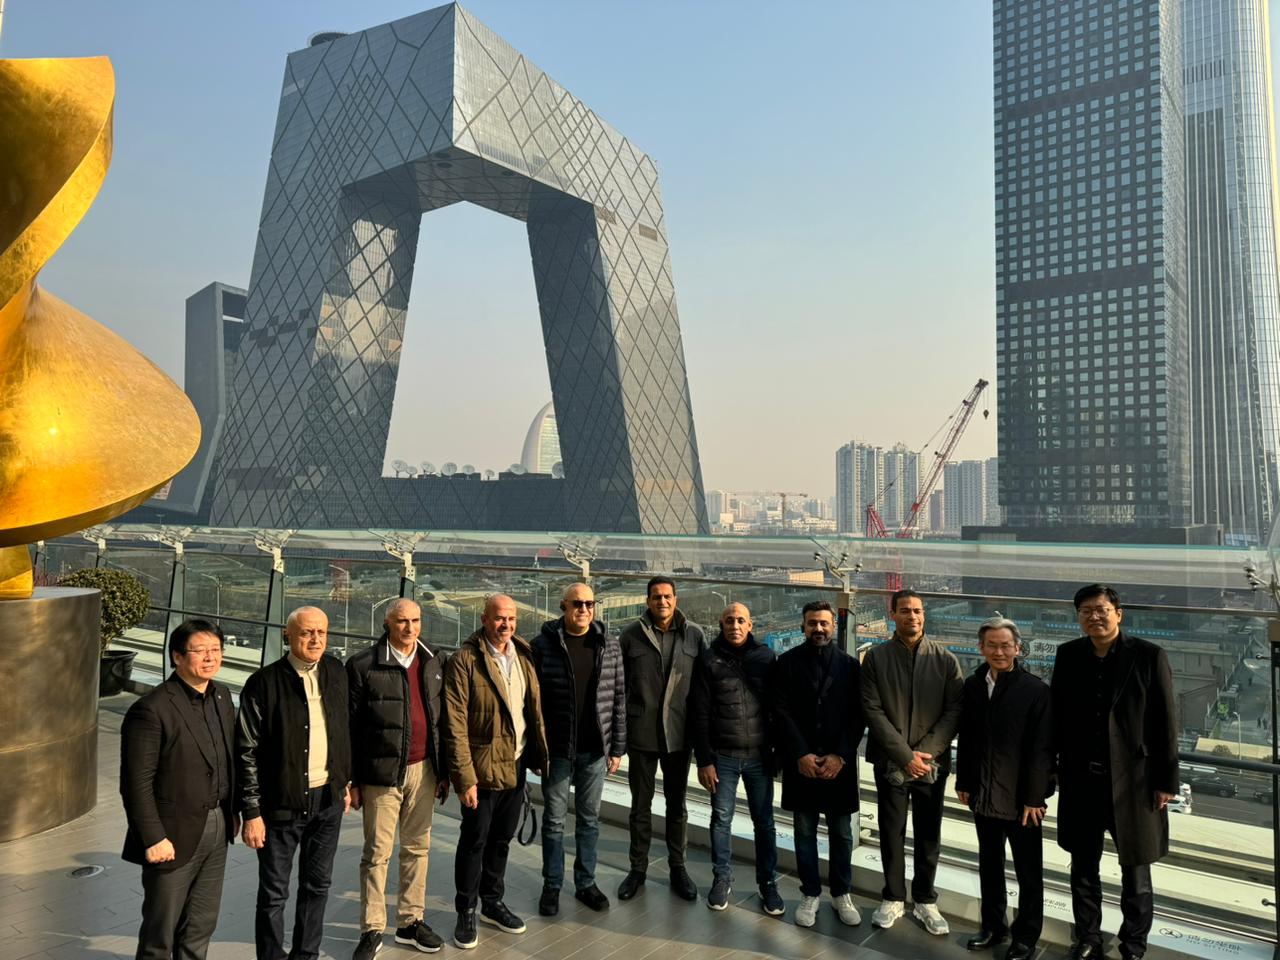 The Minister of Housing continues his tours in Beijing by inspecting the Central Business District  